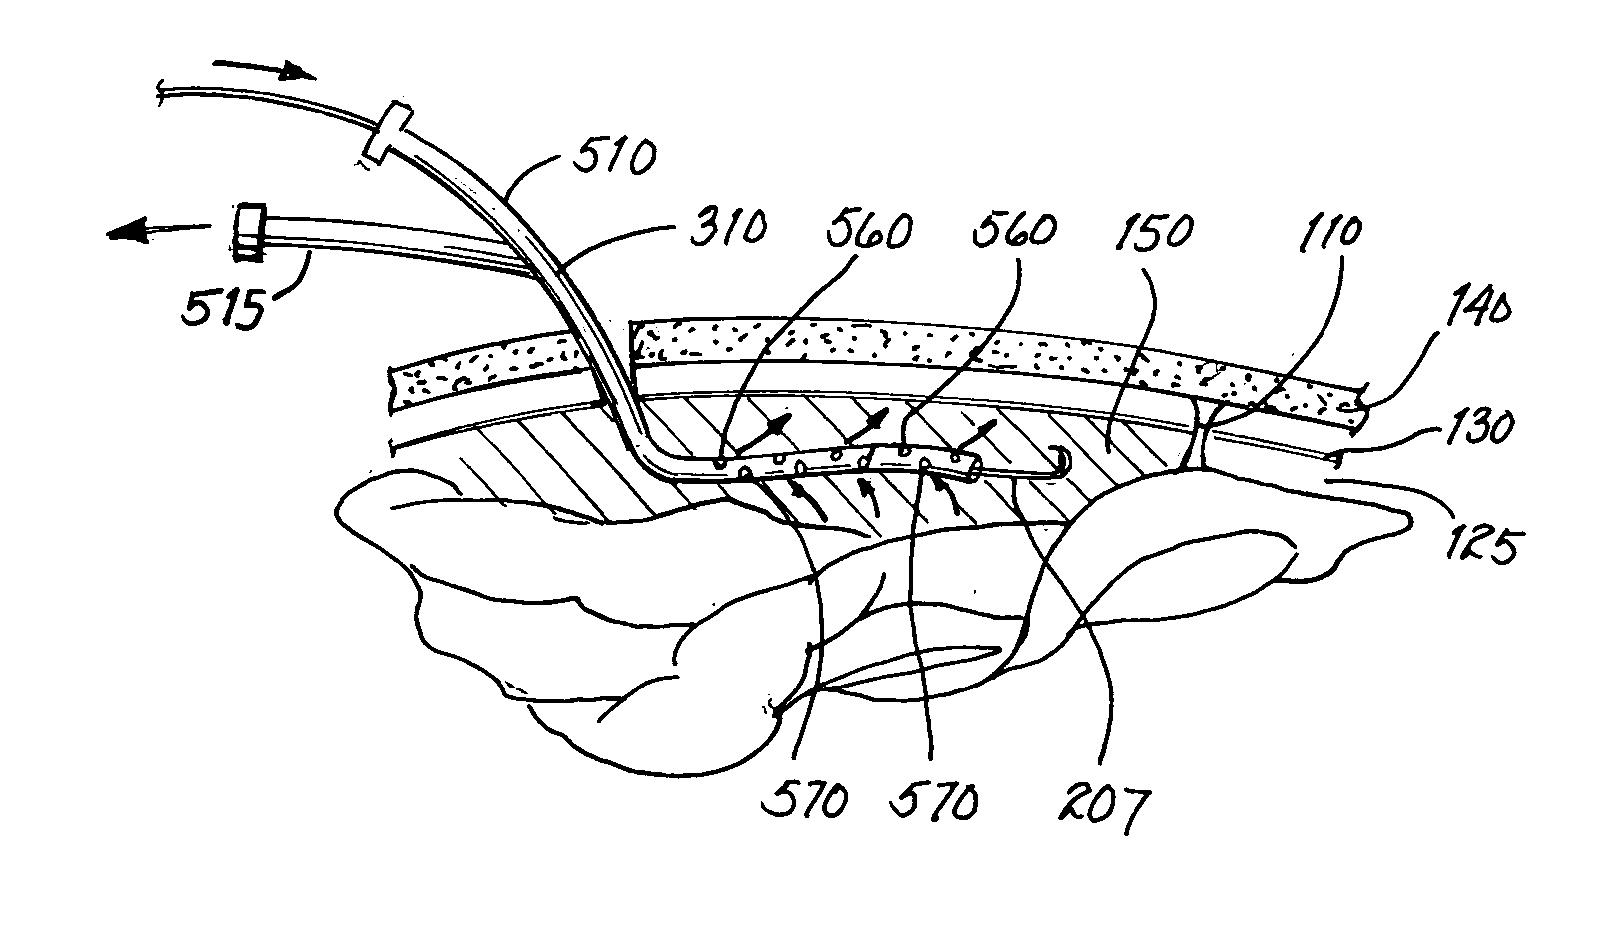 Method and apparatus for irrigation and drainage of the brain's subdural space using a percutaneous approach